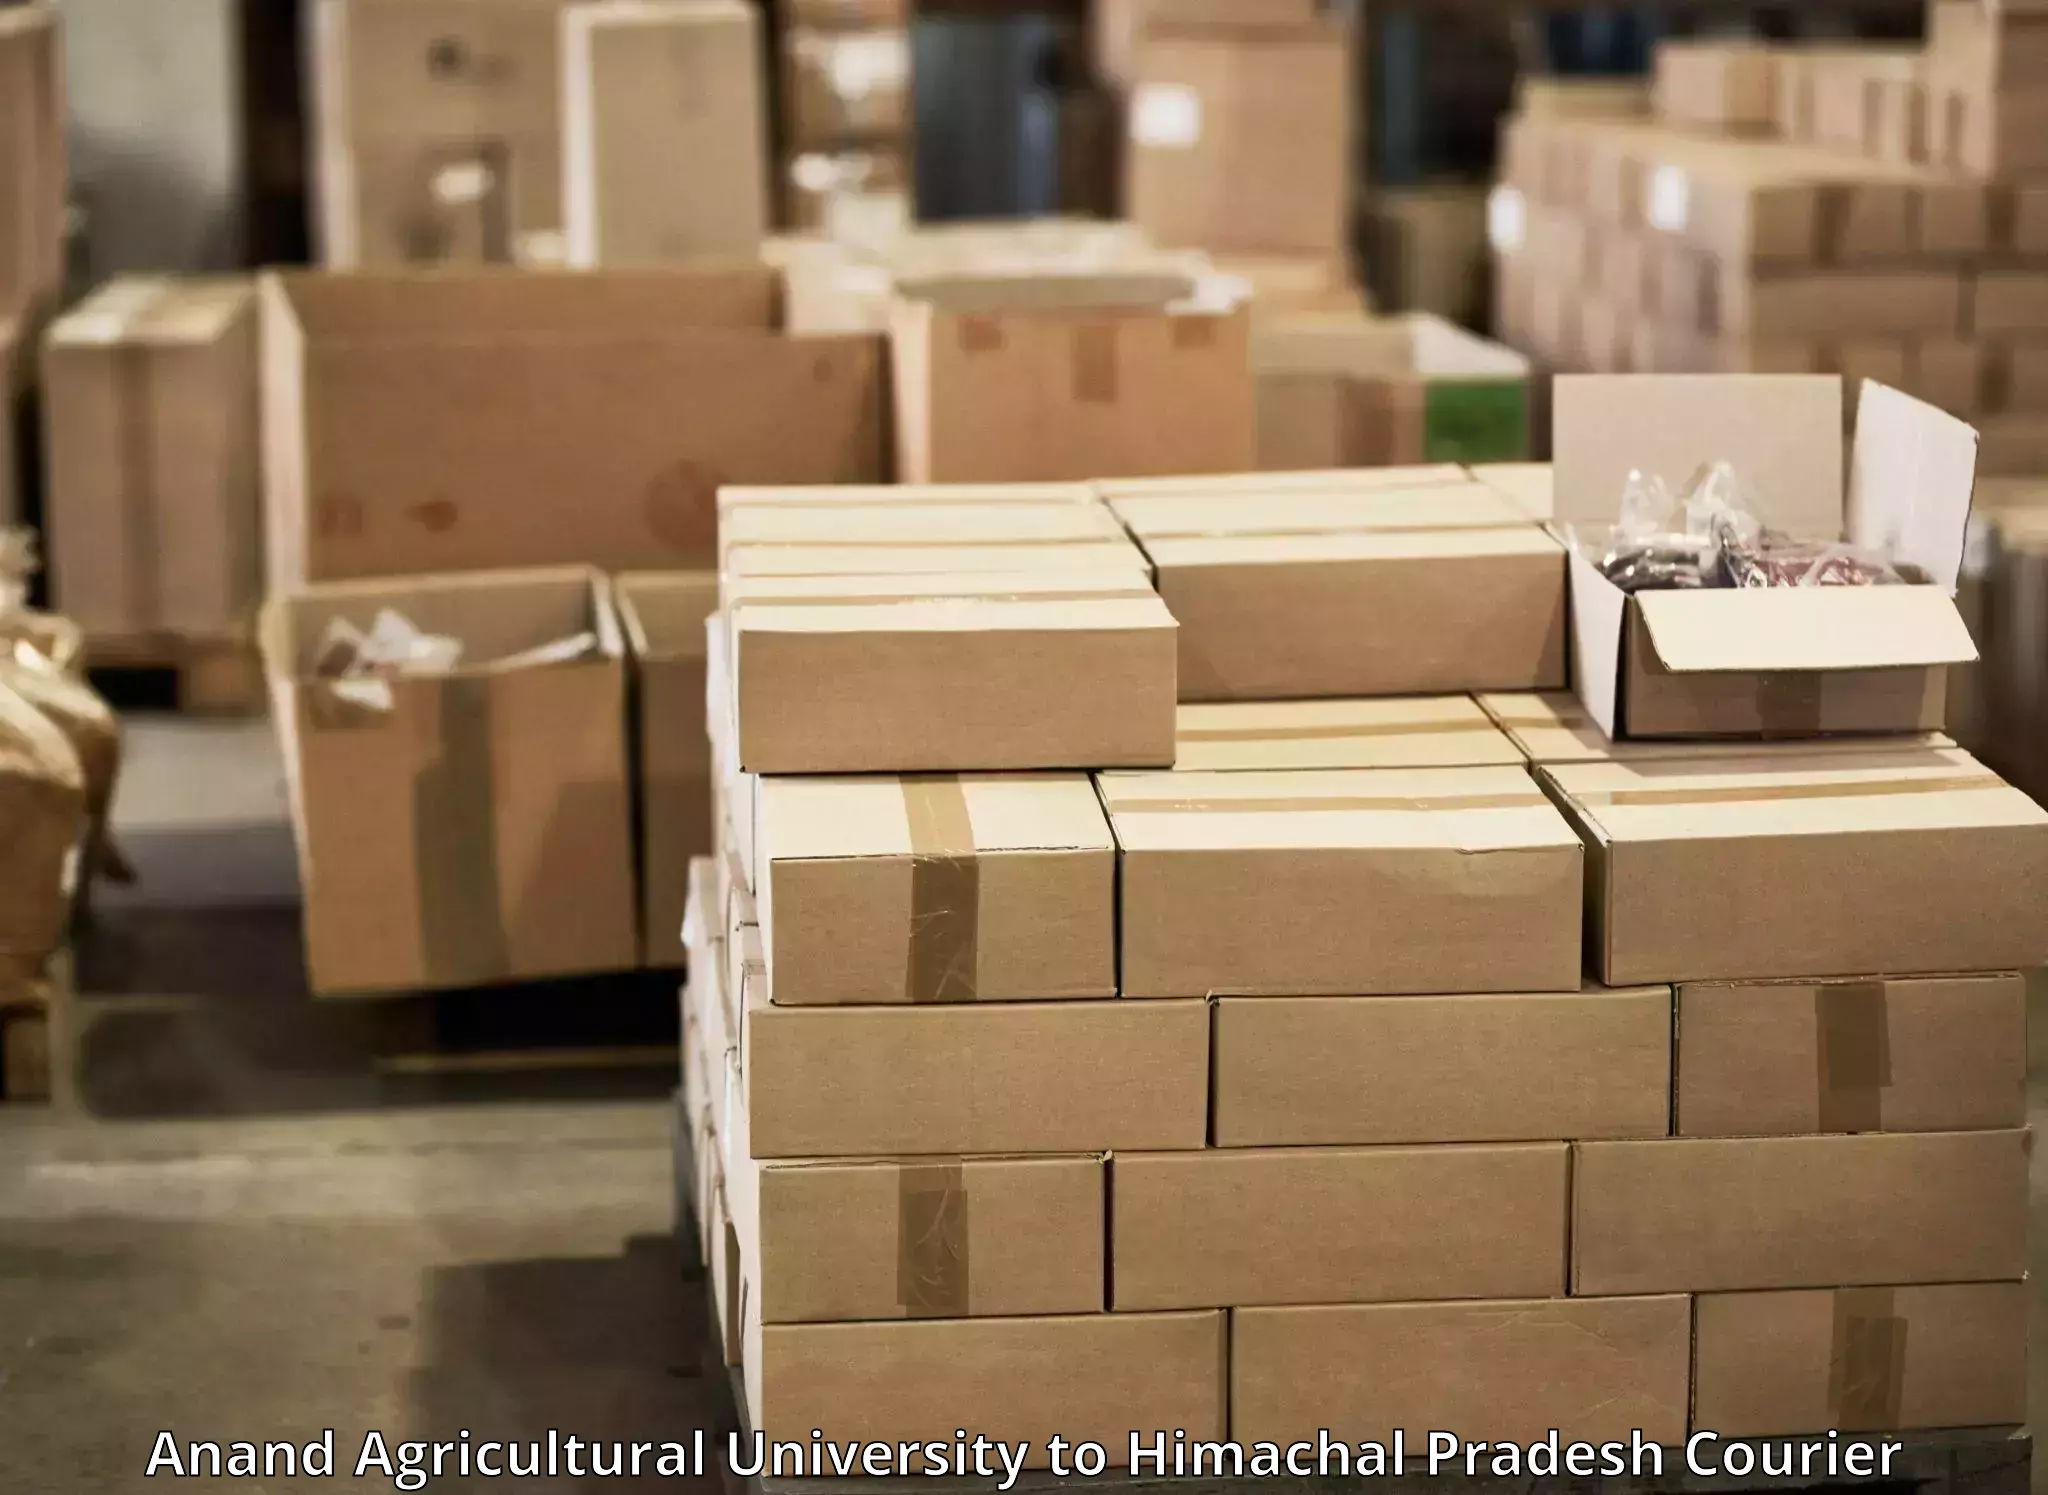 Efficient shipping platforms Anand Agricultural University to YS Parmar University of Horticulture and Forestry Solan